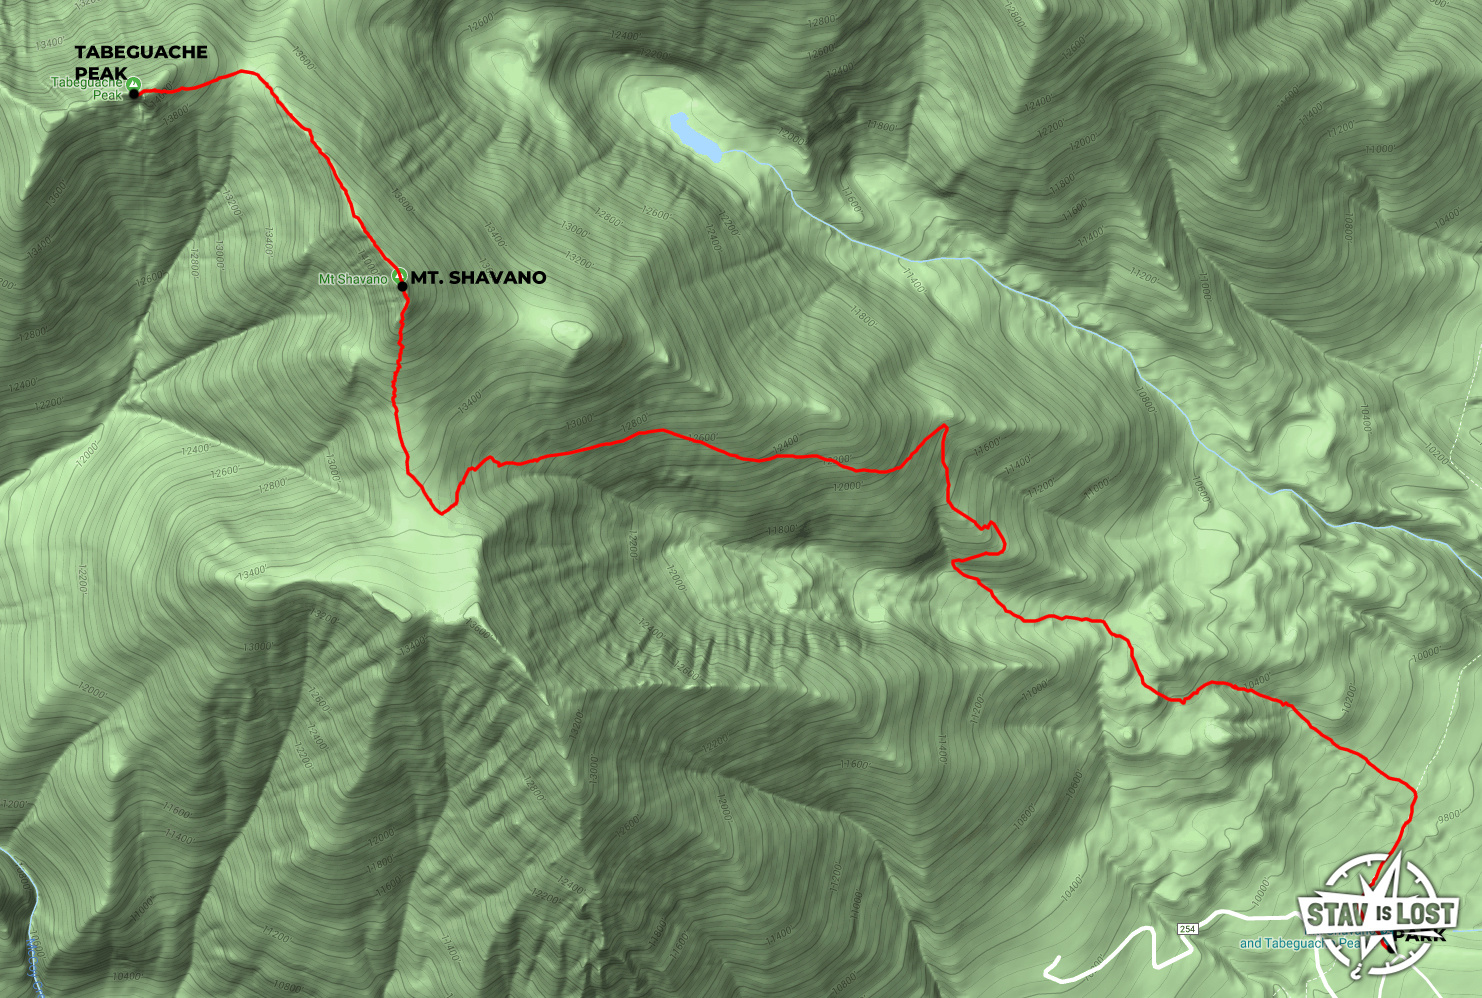 map for Mount Shavano and Tabeguache Peak by stav is lost